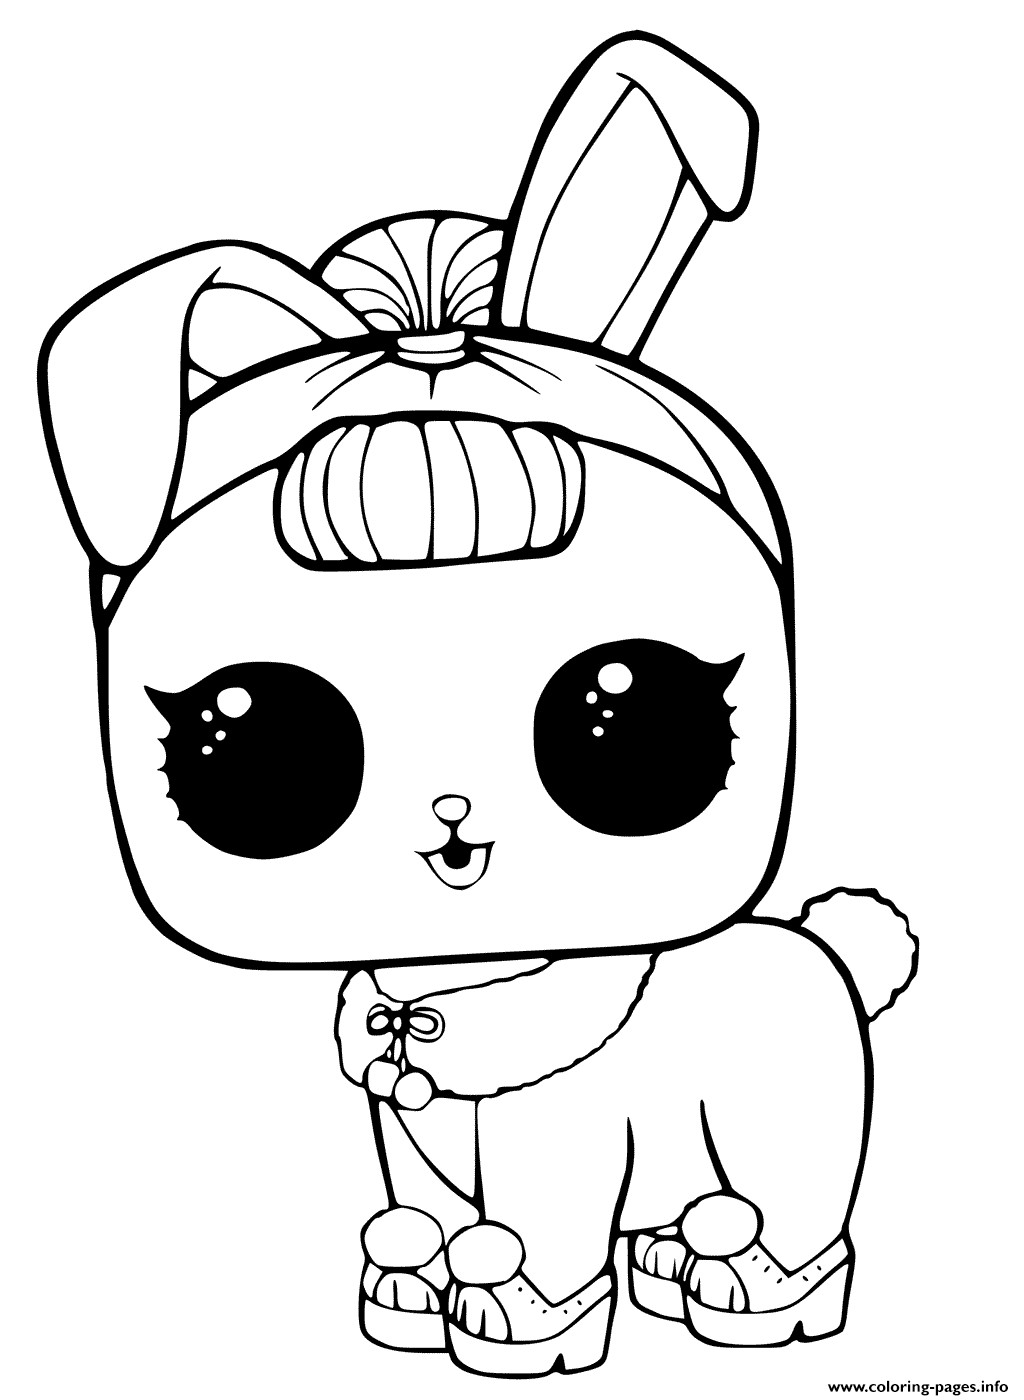 Coloring Pages Of Baby Bunnies
 Baby bunny coloring pages Coloring pages for kids